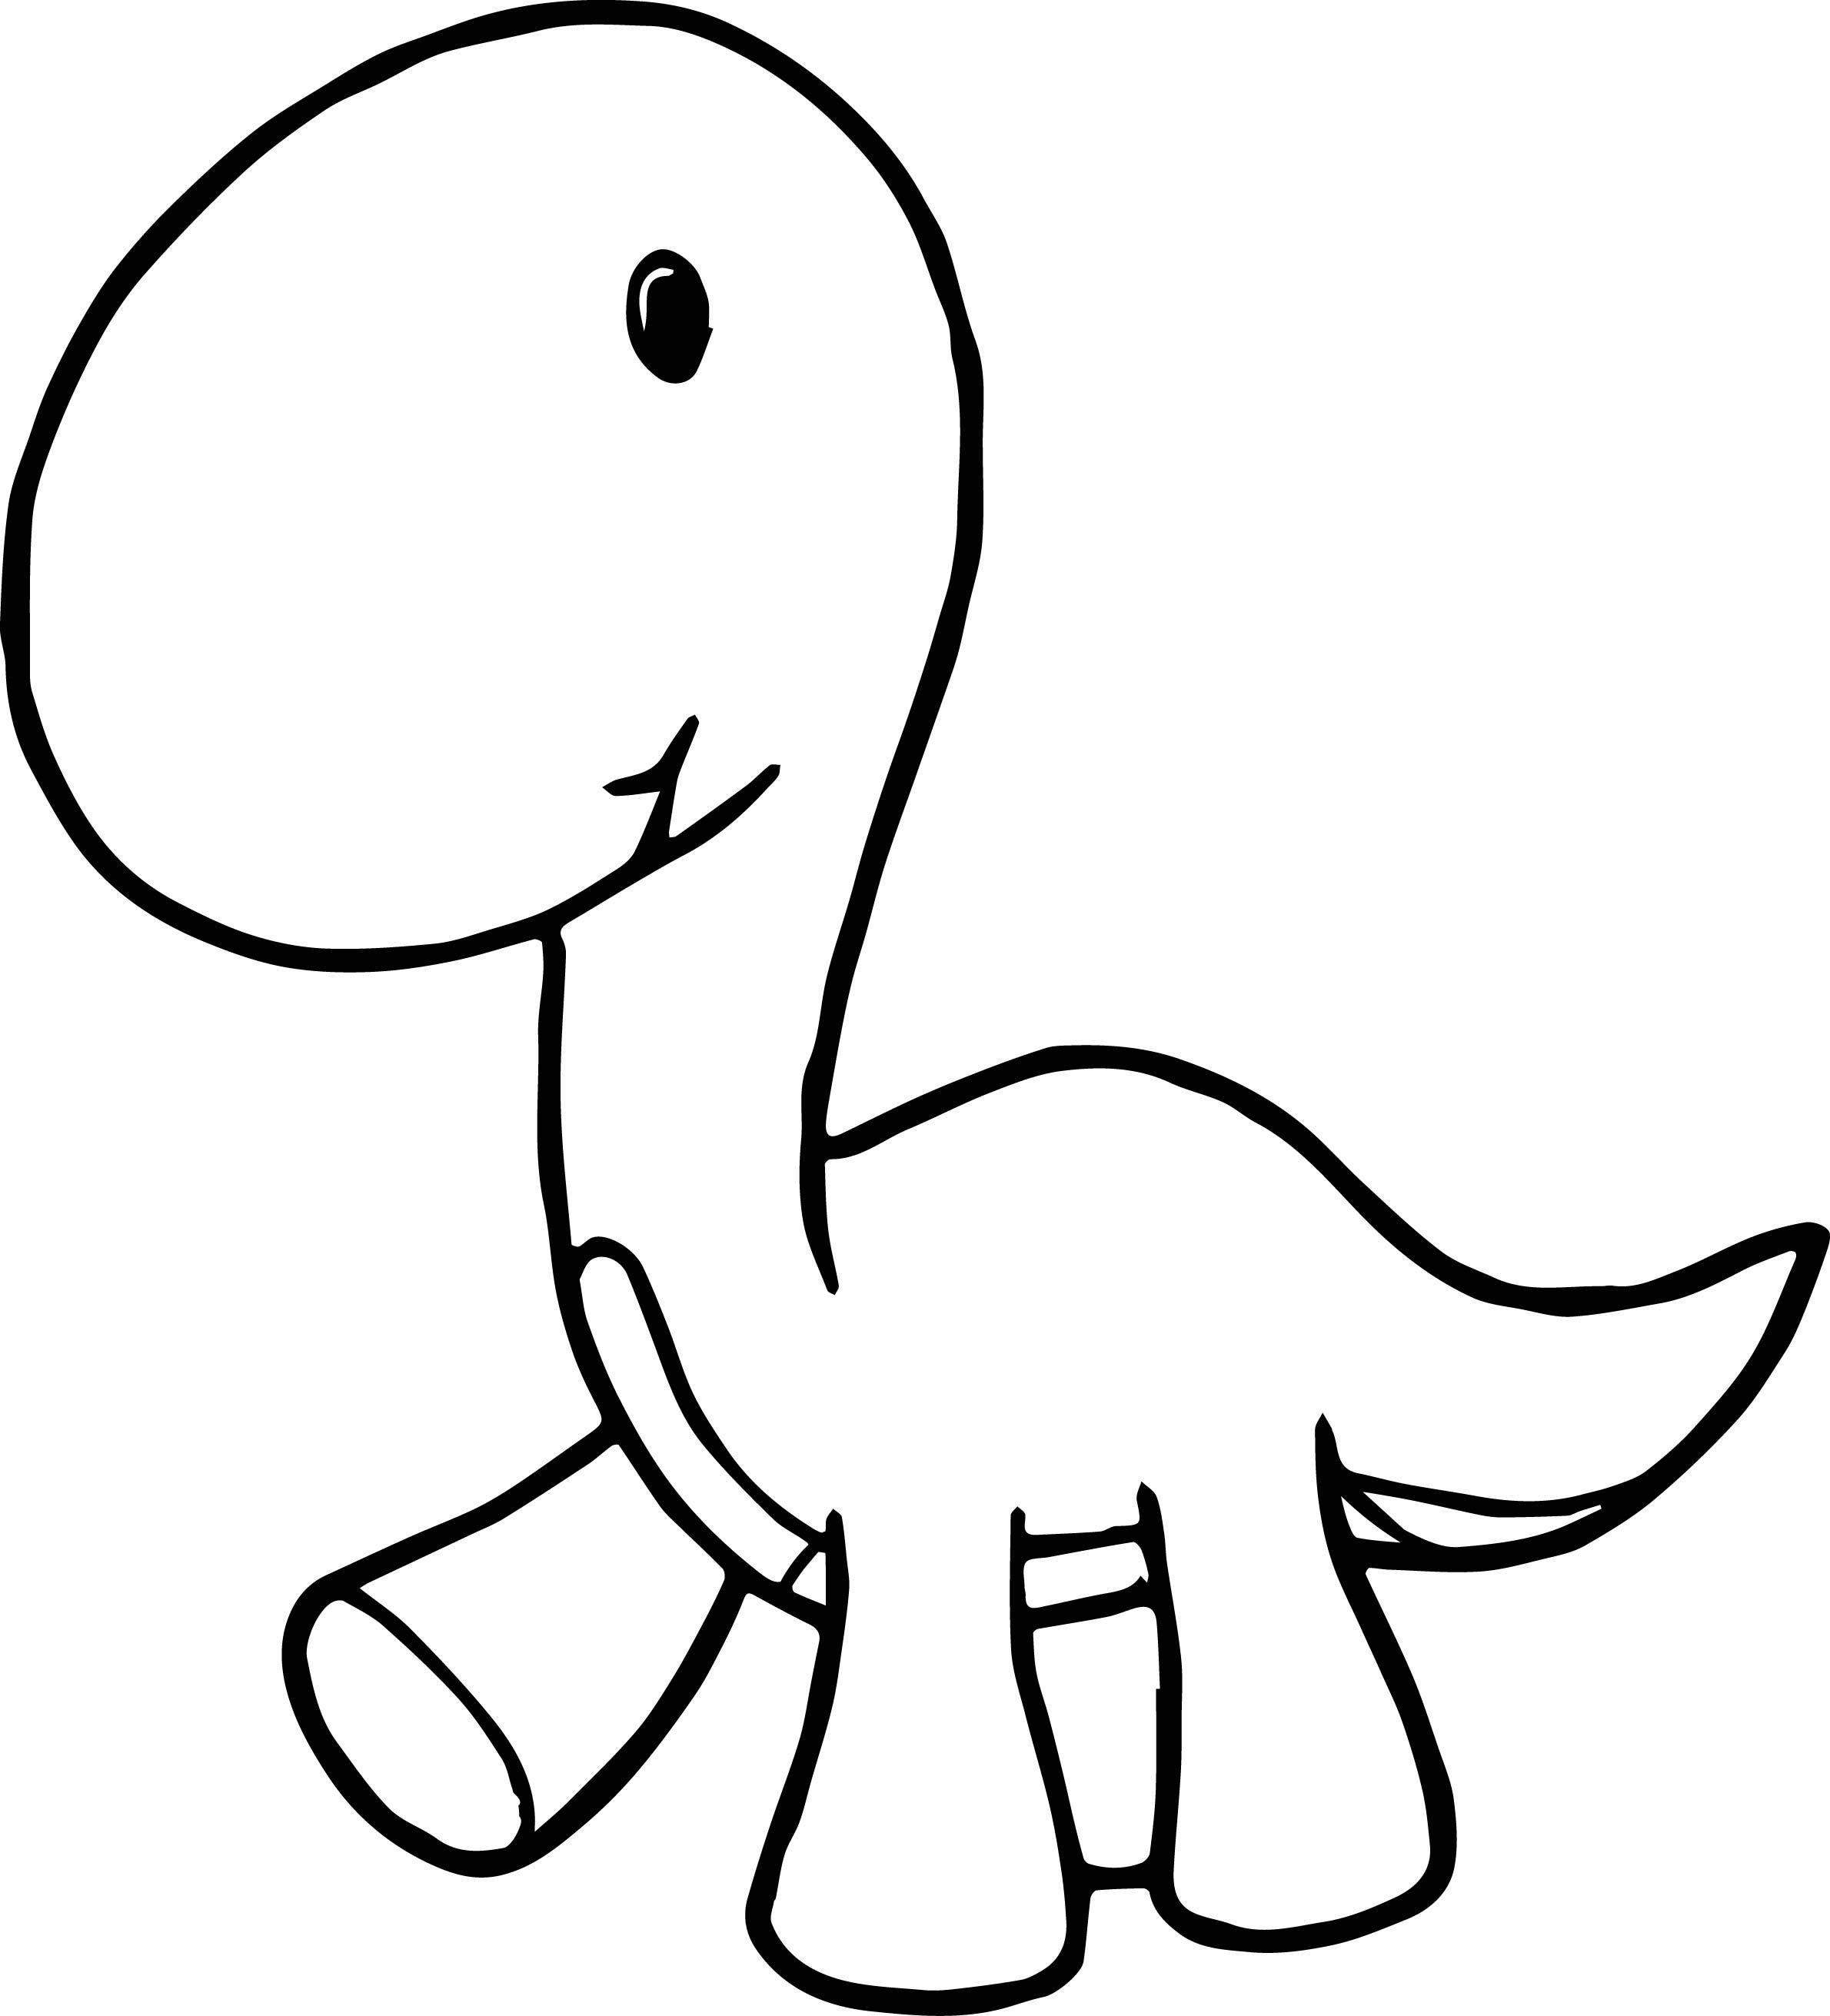 Dinosaur Head Coloring Pages at GetDrawings | Free download